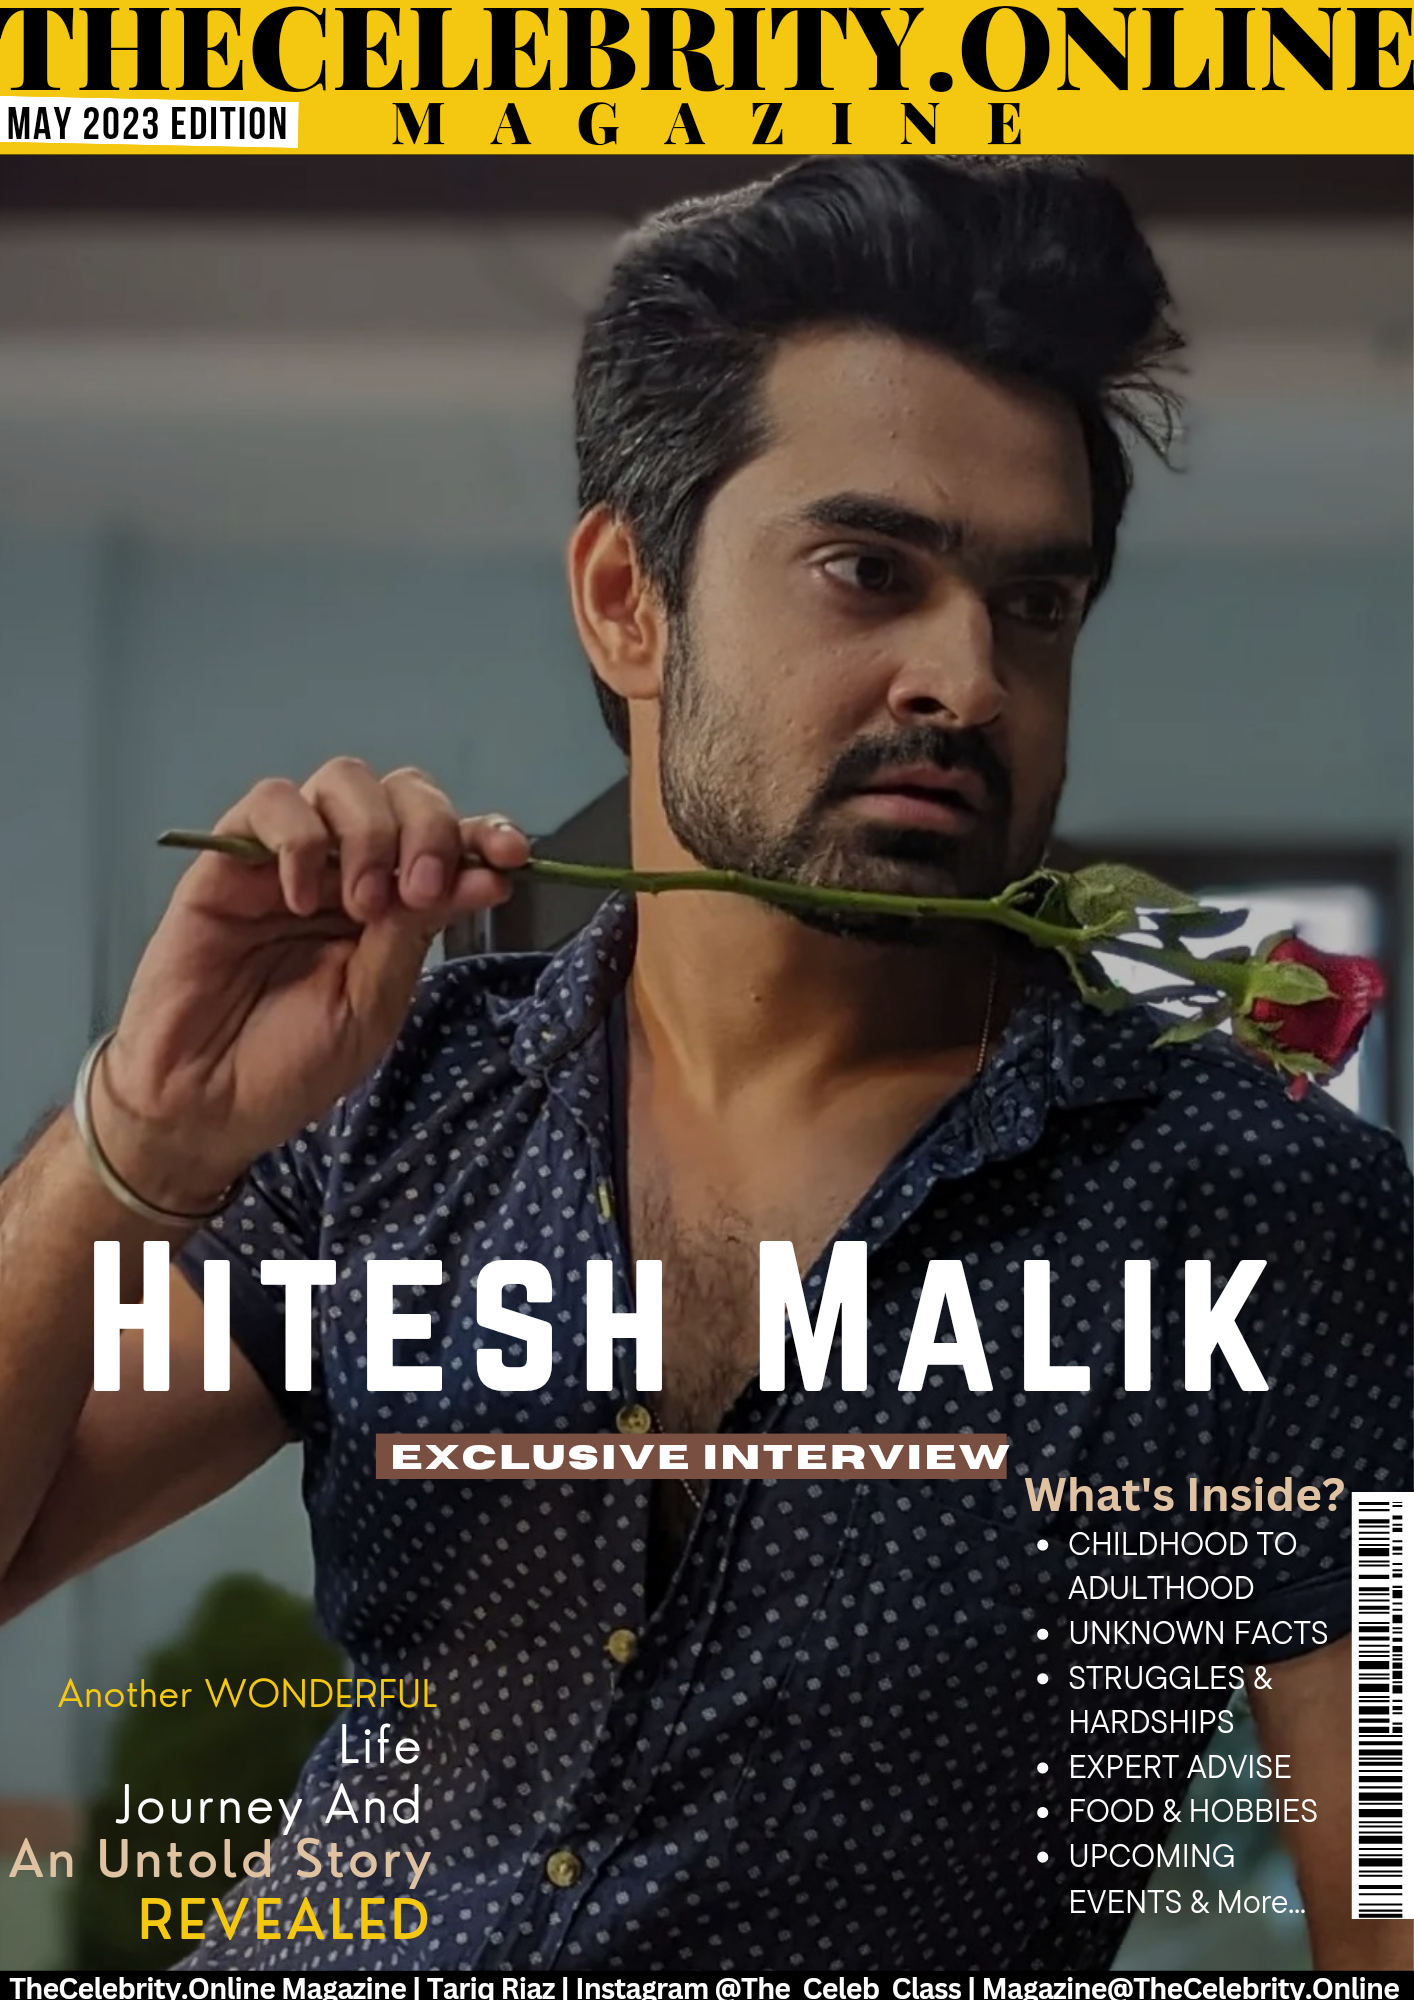 Hitesh Malik Exclusive Interview ‘Hear your inner self always. Be kind to yourself’